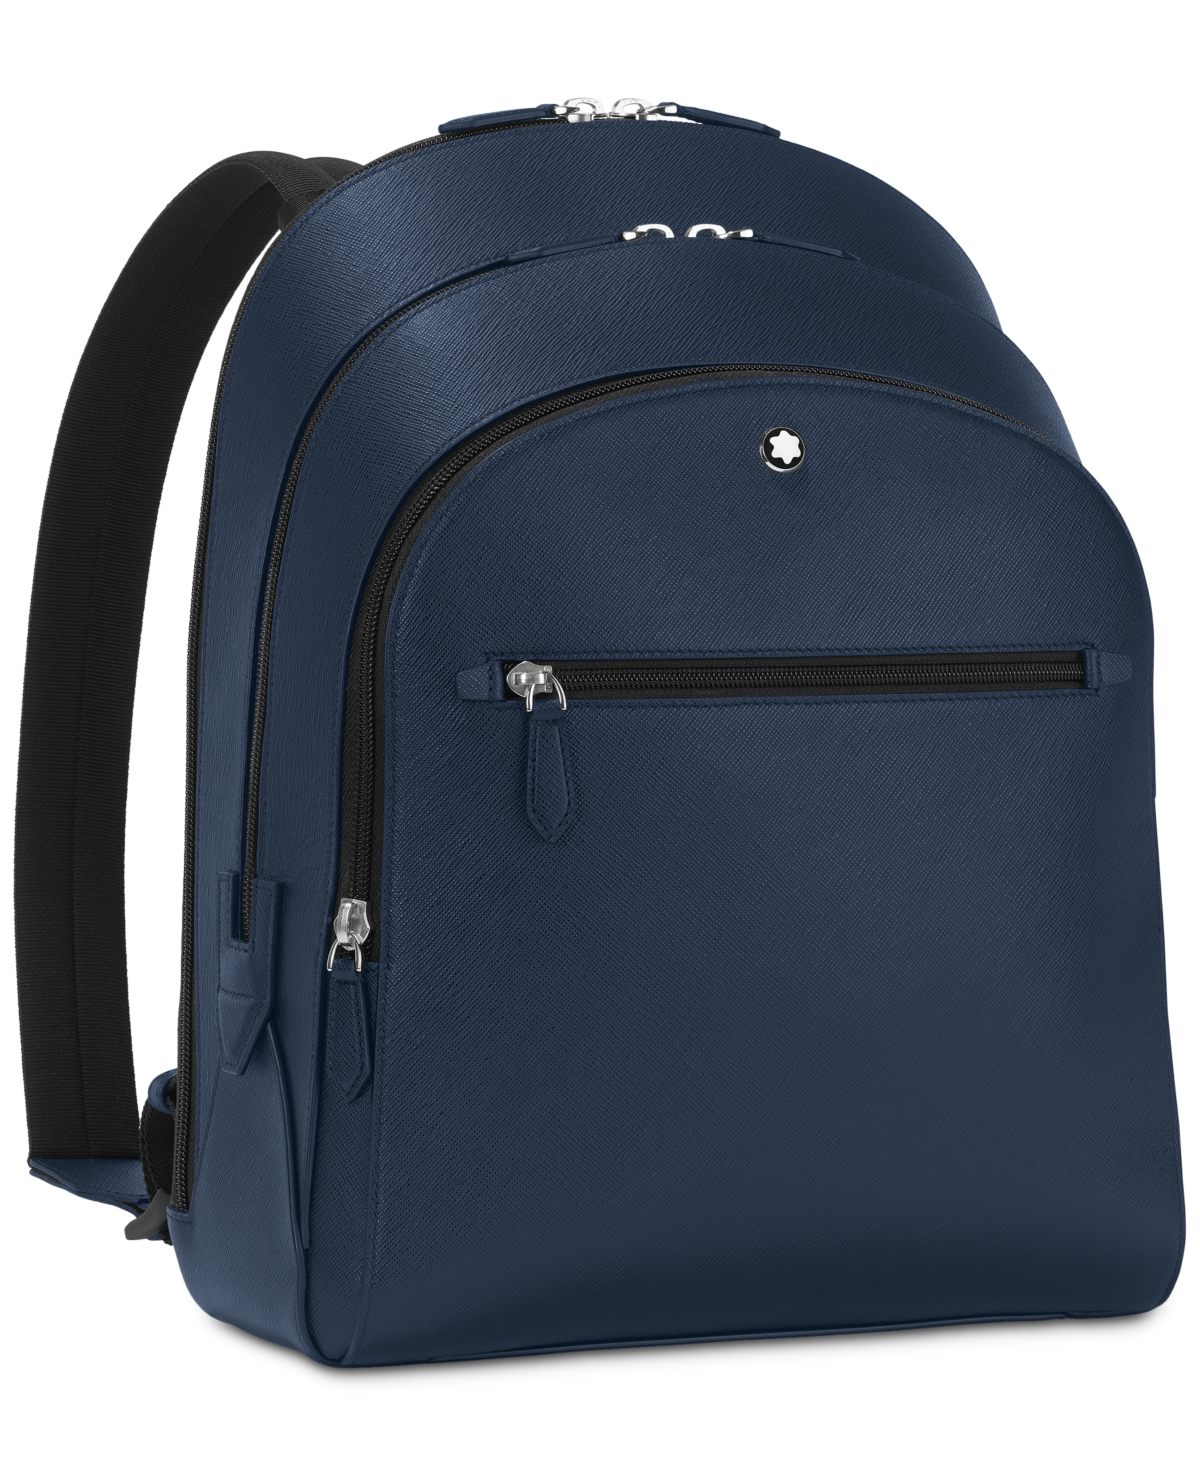 Montblanc Sartorial Medium Leather Backpack In Blue